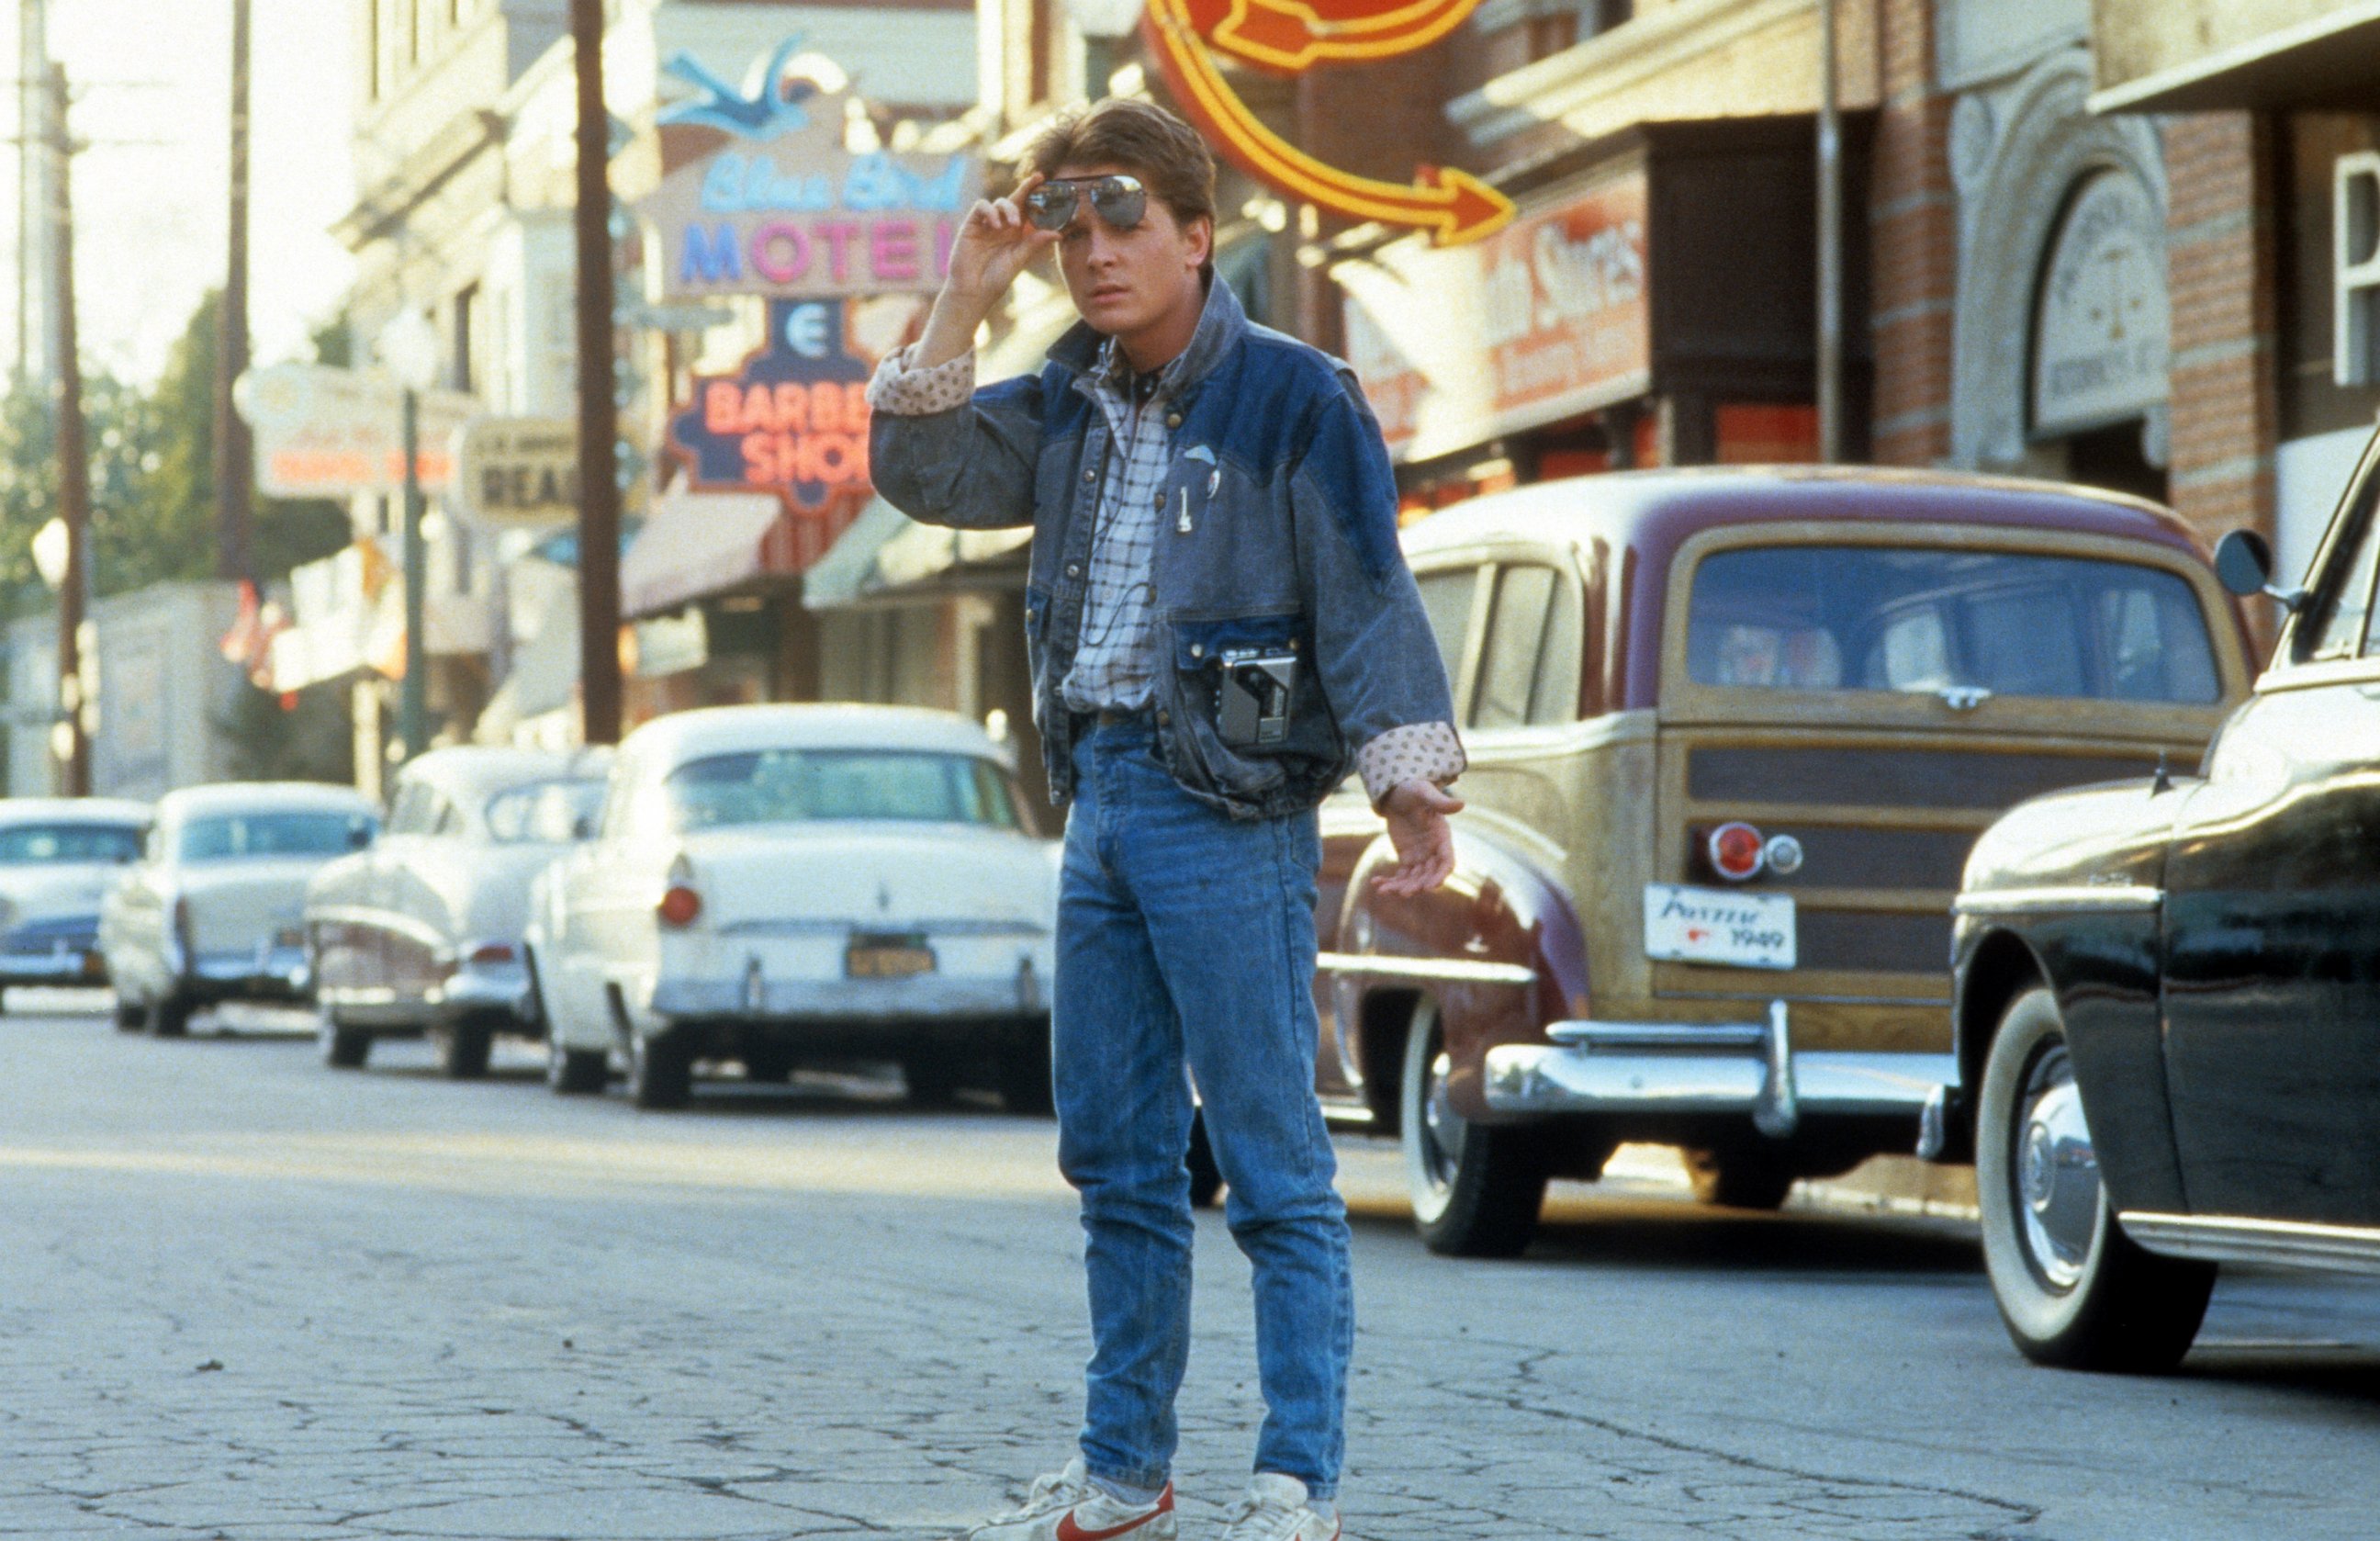 Michael J. Fox came back from the future